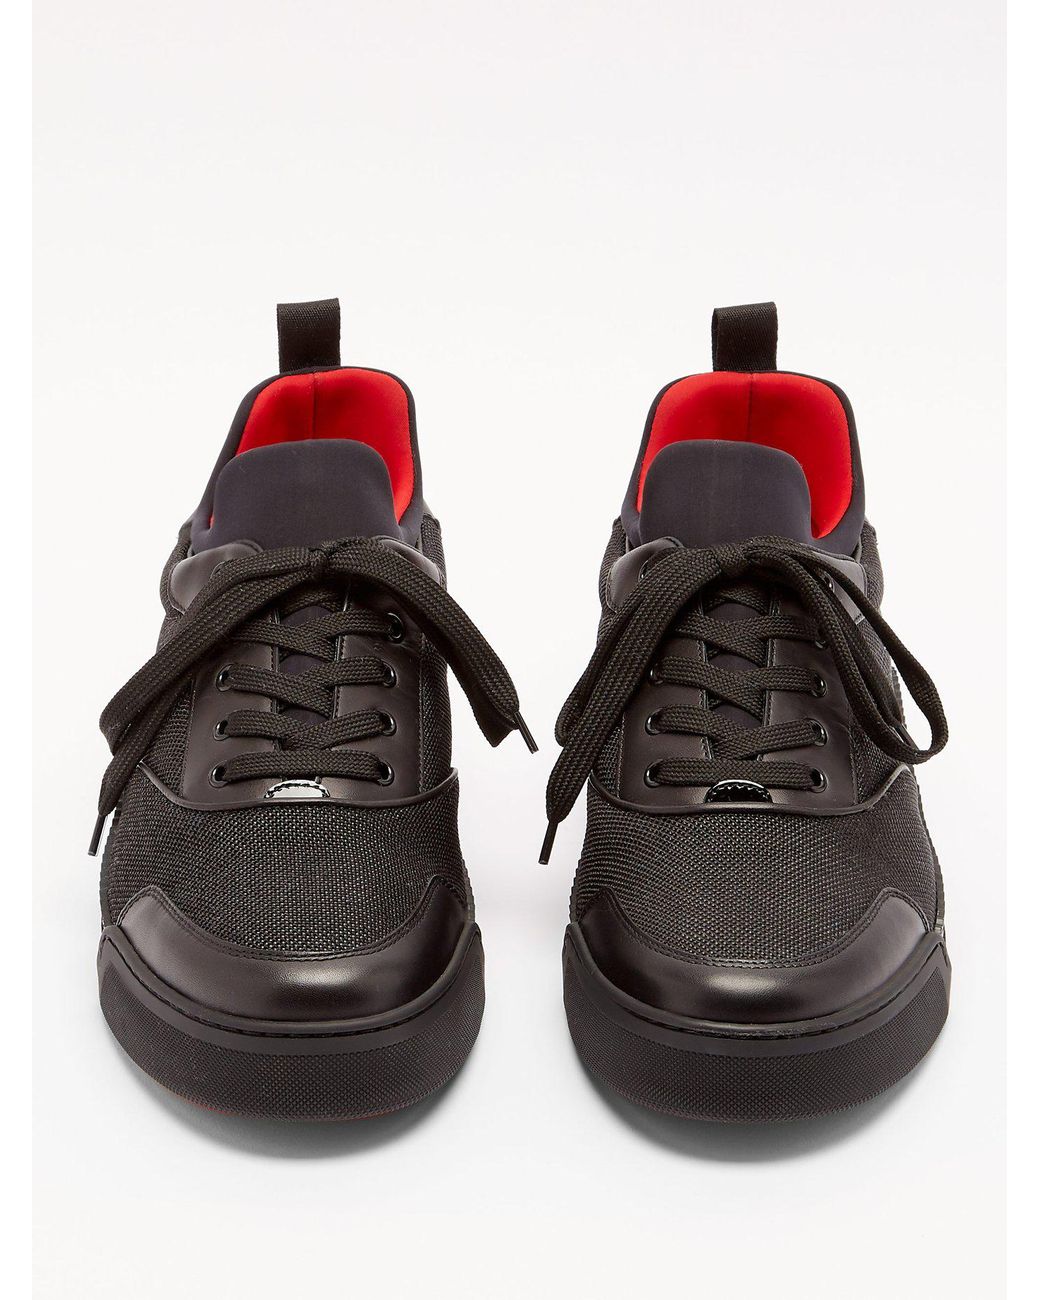 Christian Louboutin Aurelien Low Top Leather Trainers in Black for